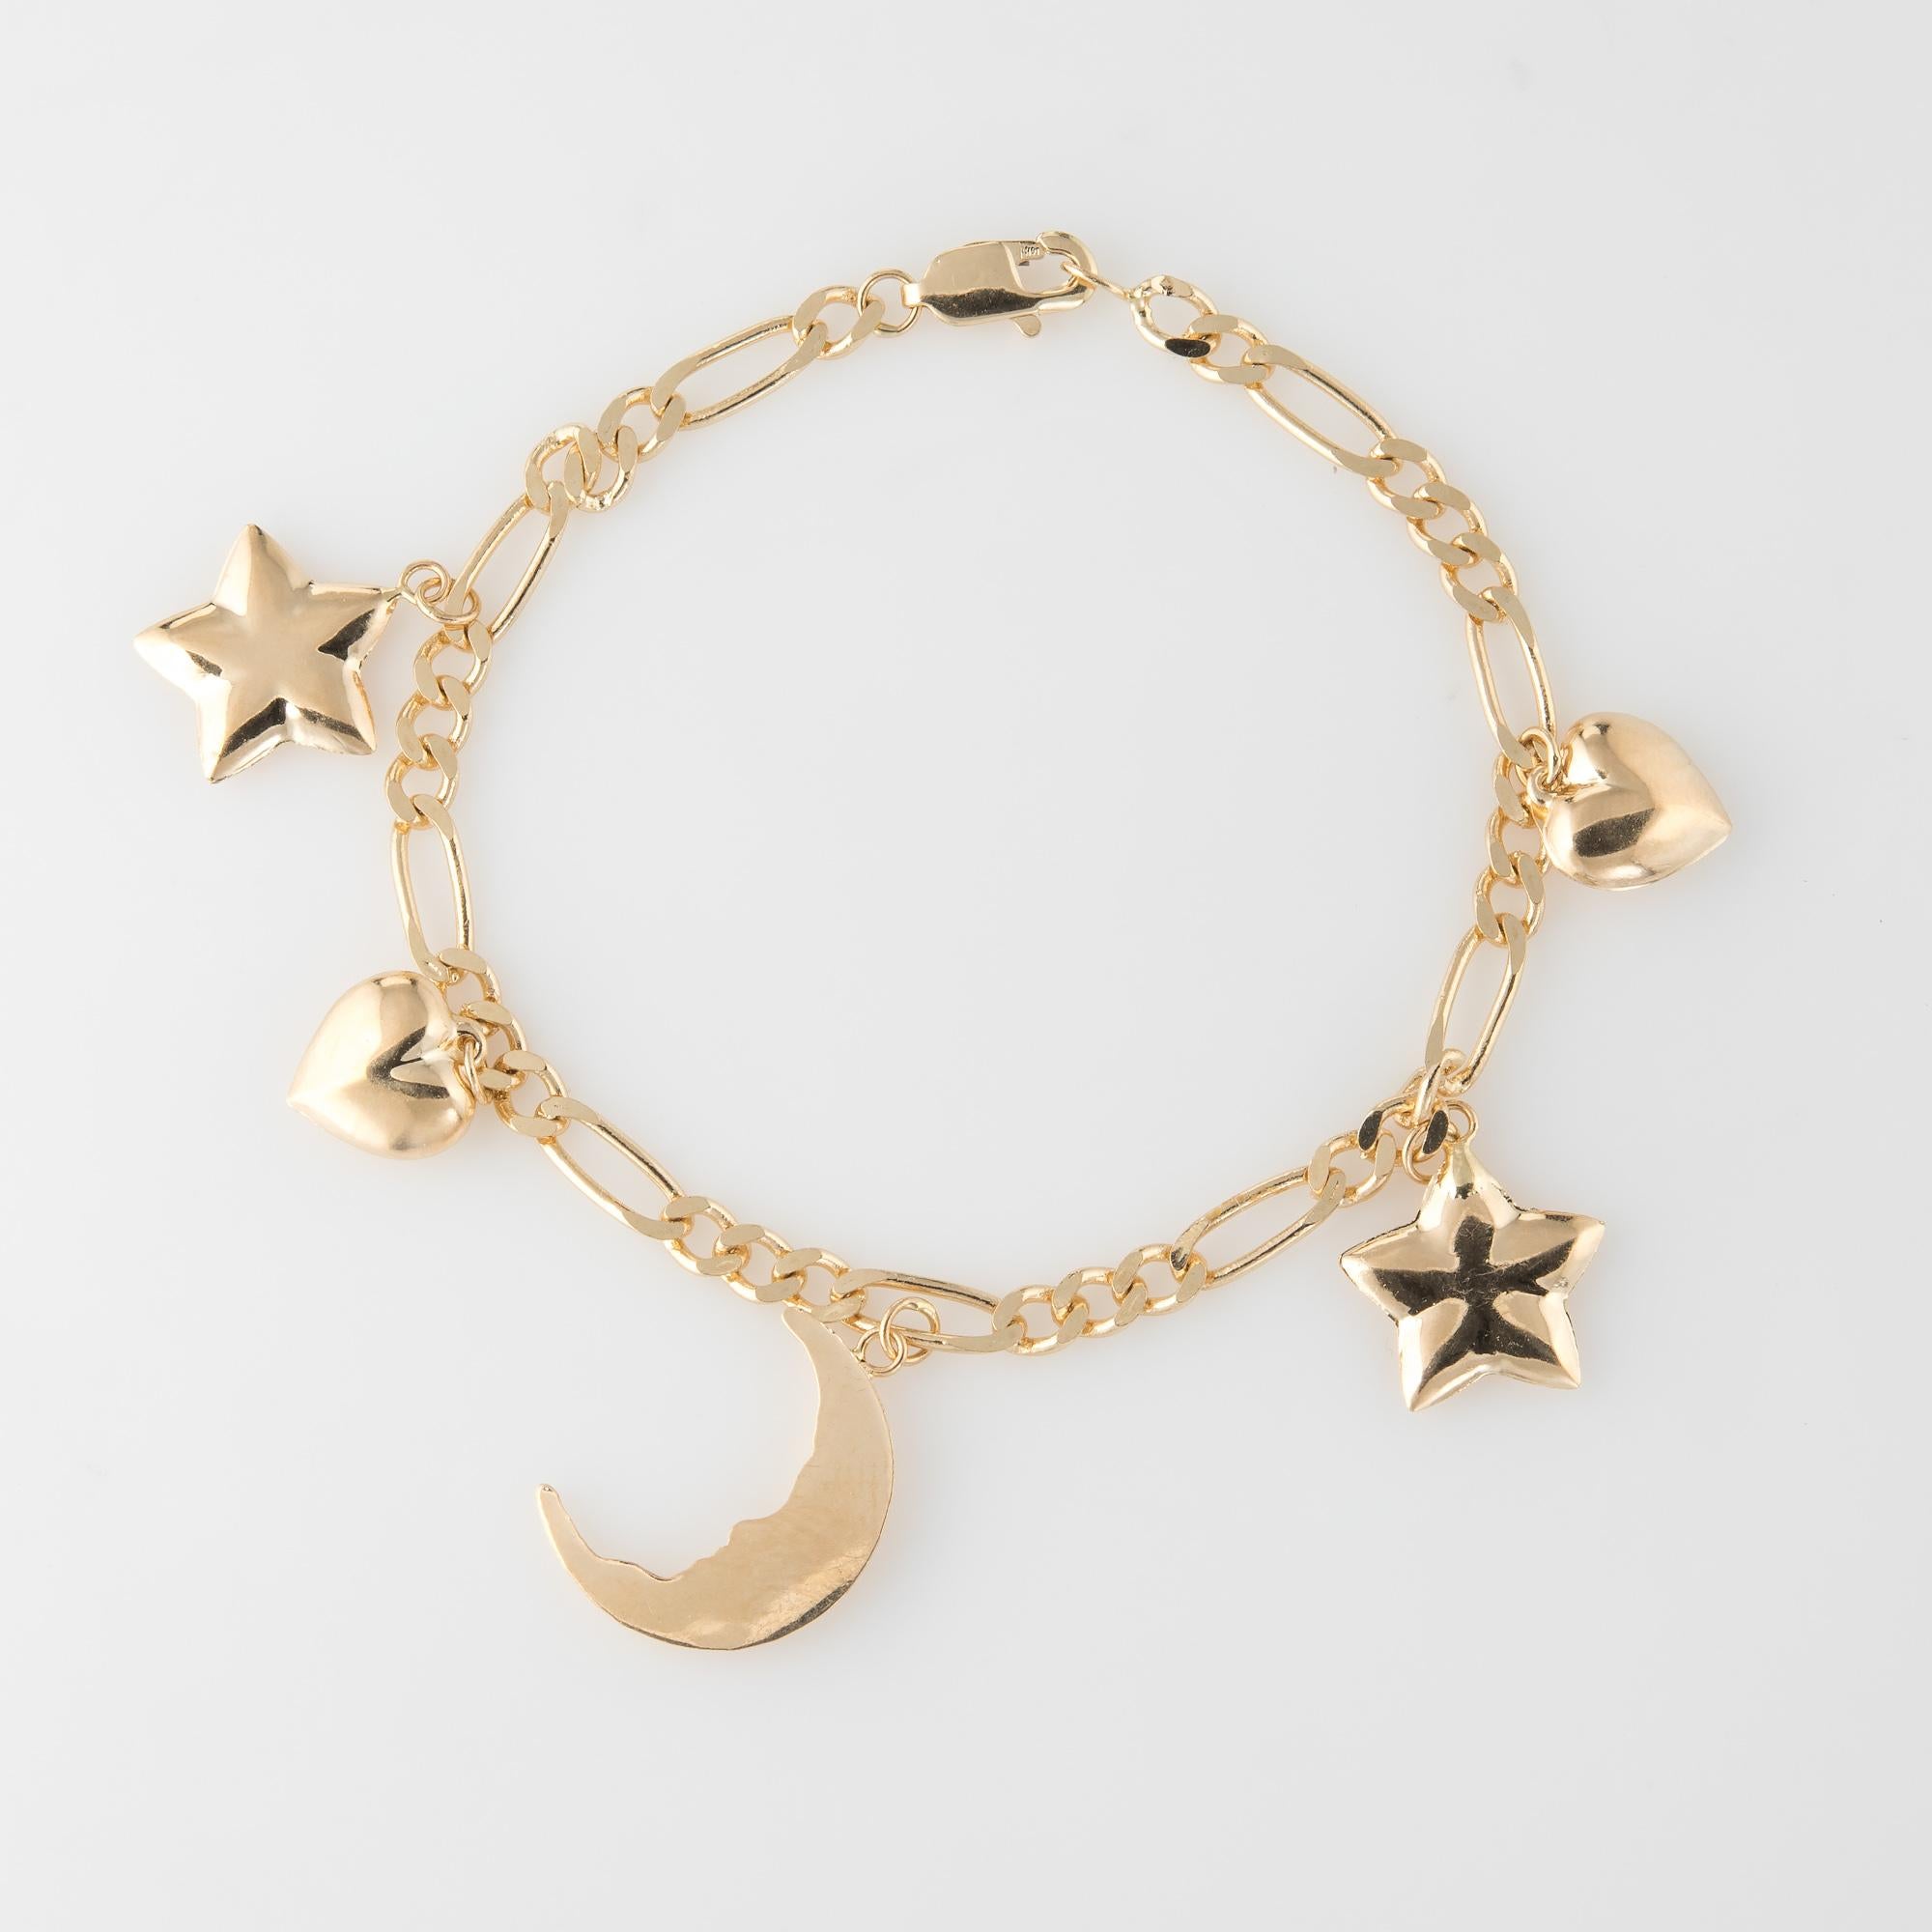 Stylish and finely detailed vintage celestial themed charm bracelet, crafted in 14 karat yellow gold.  

The charm bracelet features five charms with a crescent moon (and moon face), heart and star. The hollow charms have a lightweight feel.  

The